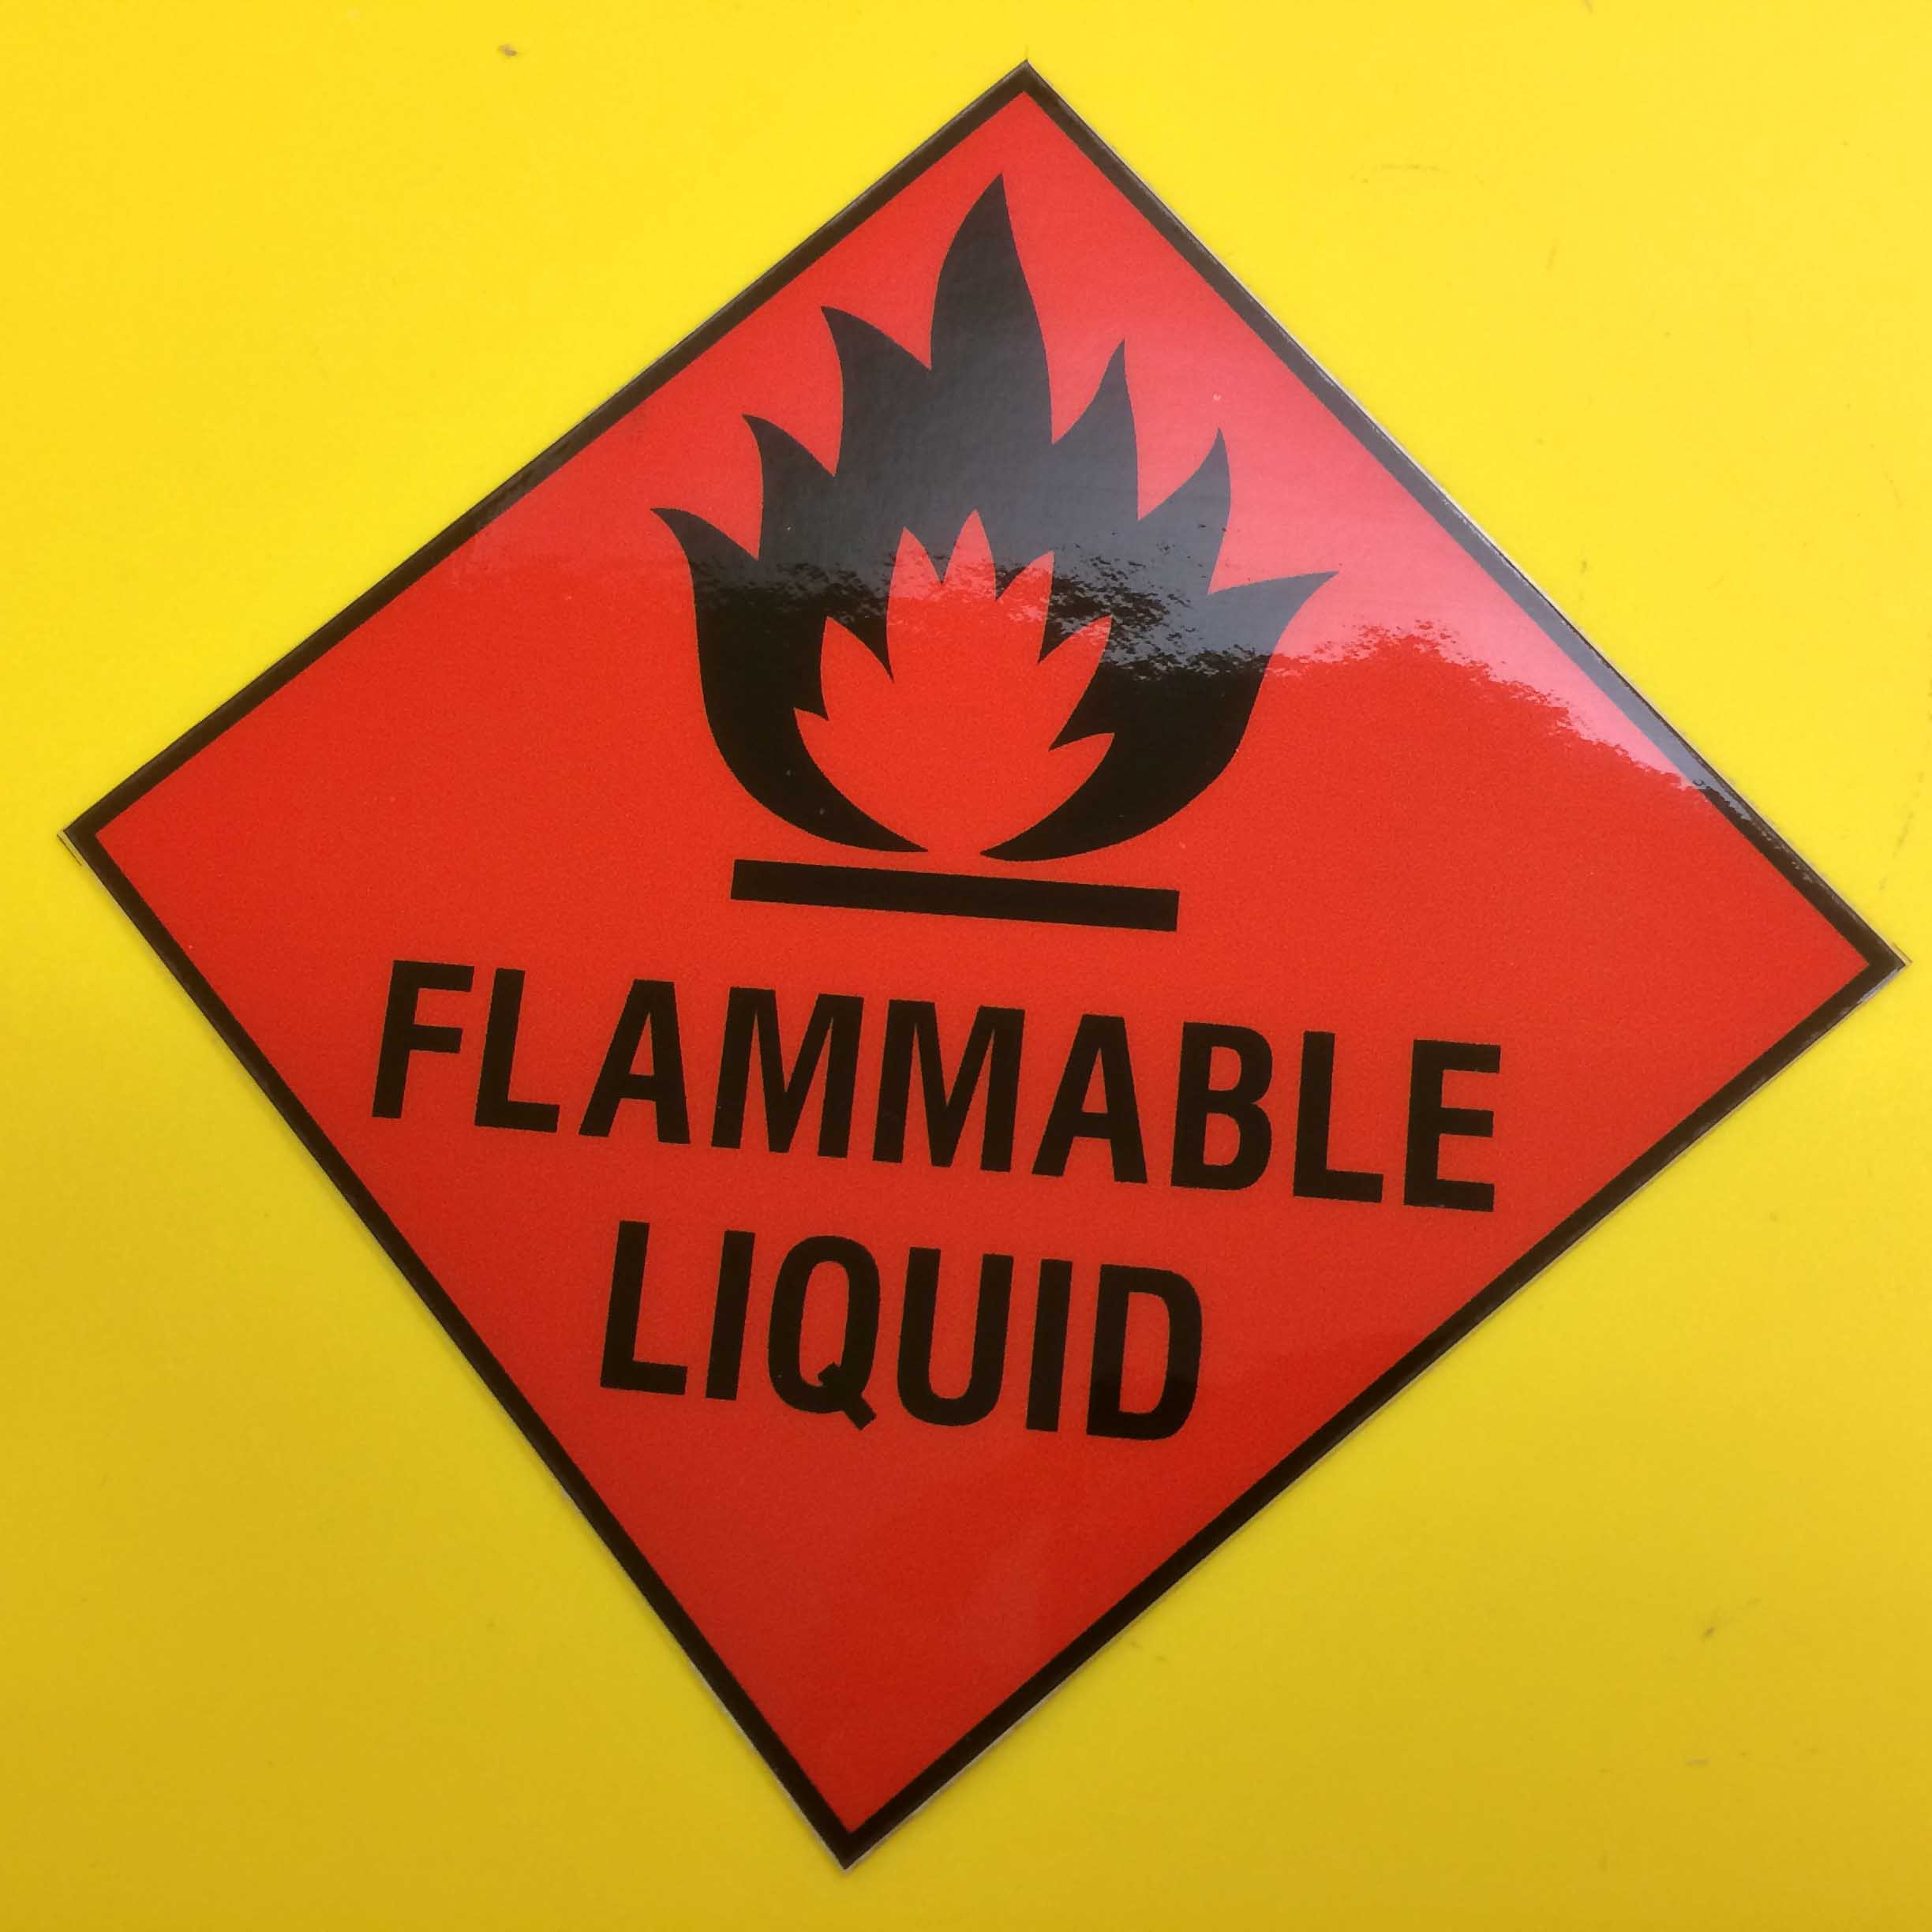 FLAMMABLE LIQUID WARNING STICKER. Black flames at the top. Below is Flammable Liquid in black capitals. Red, diamond shaped sticker edged in black.